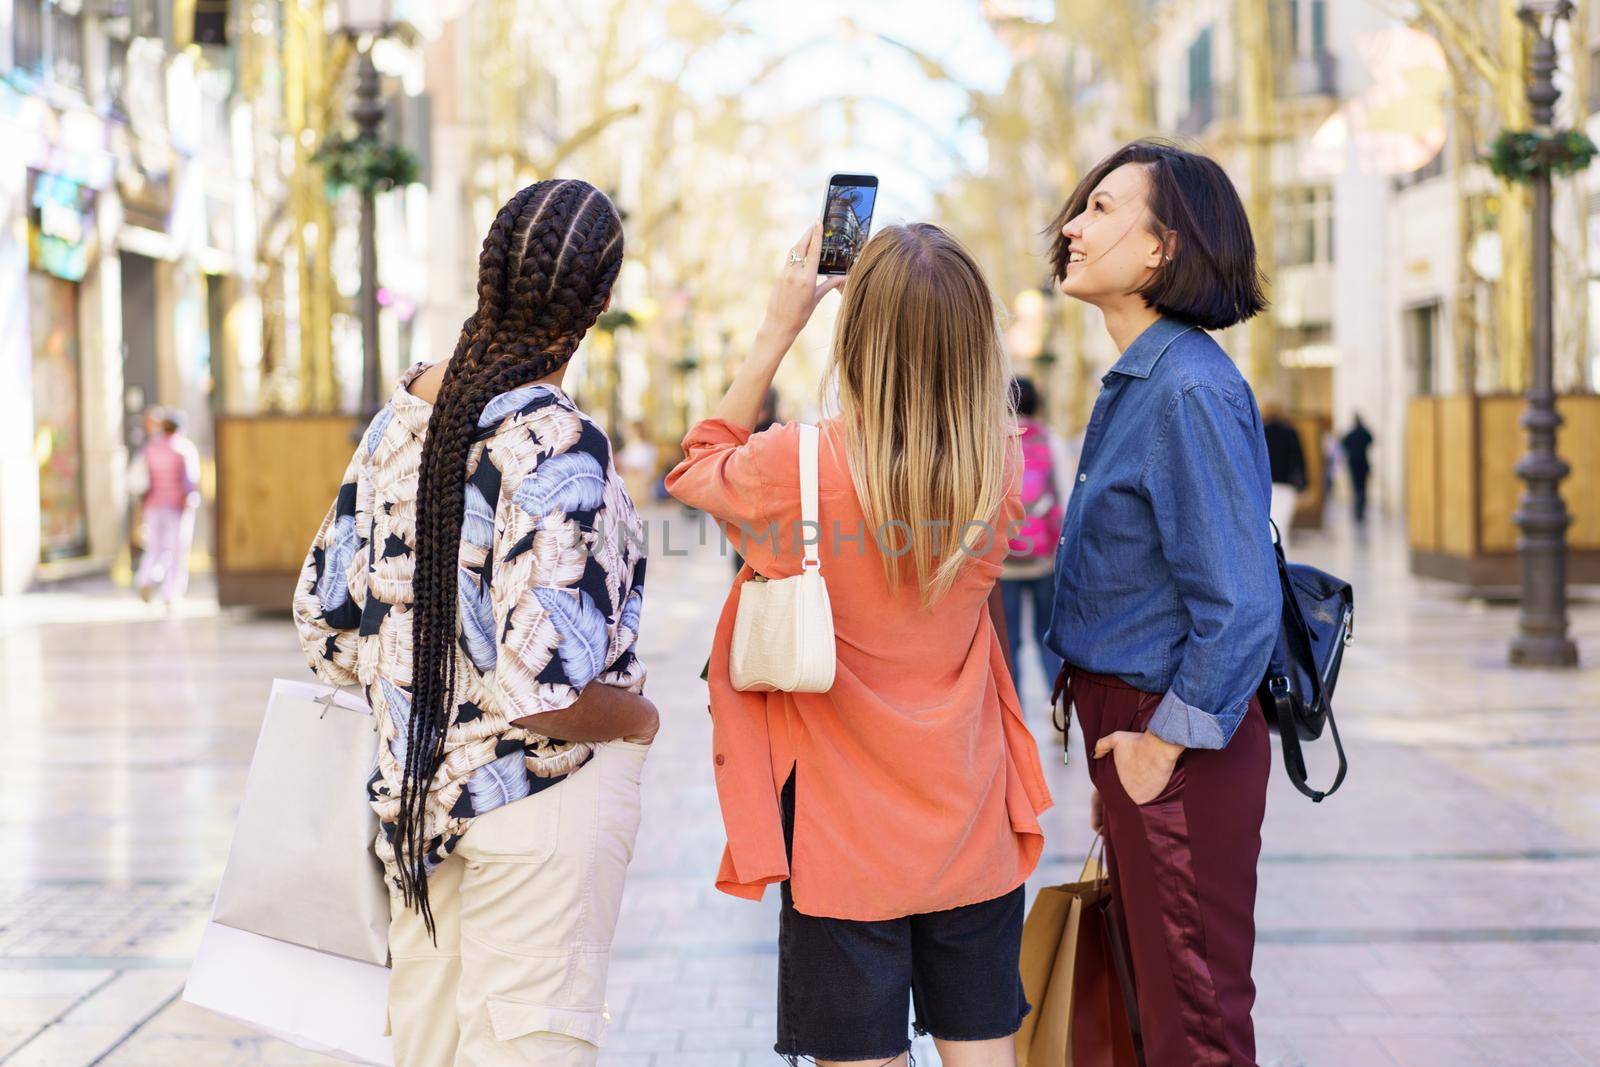 Group of diverse female friends standing together on blurred city street and taking selfie on mobile phone after shopping